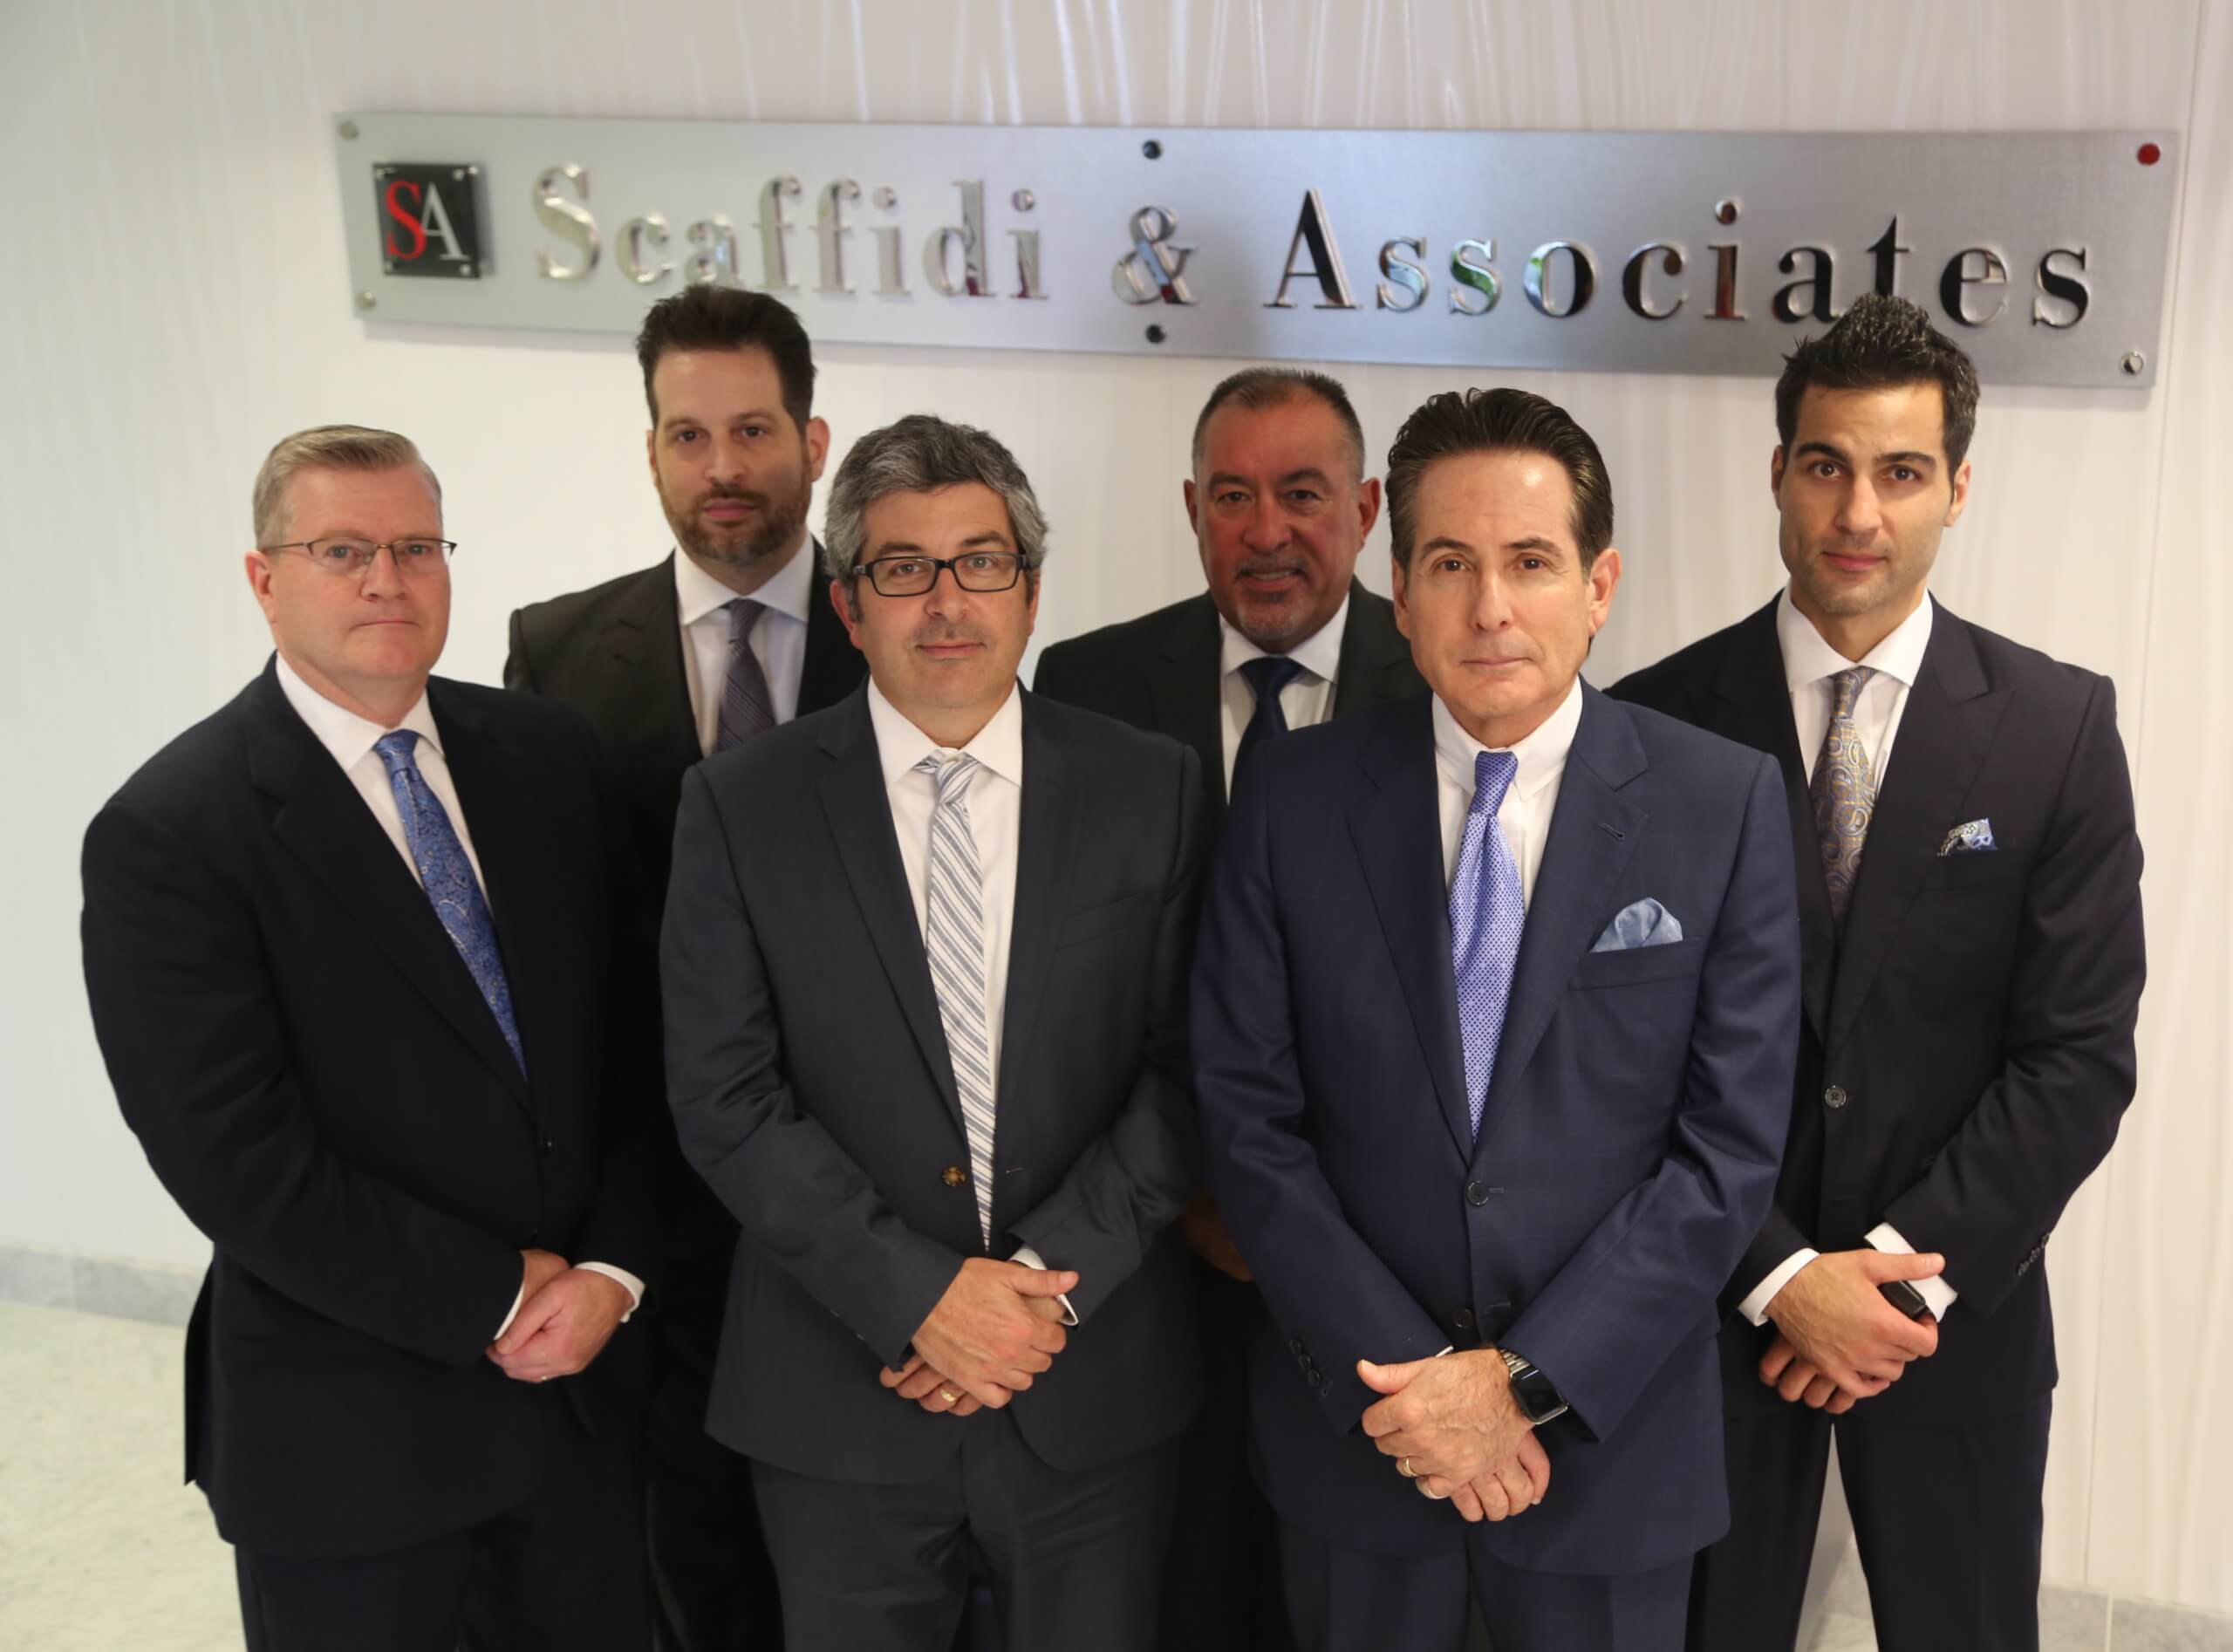 Roy Scaffidi and the trial attorneys at Scaffidi & Associates posing for a group photo in their New Your City law firm.